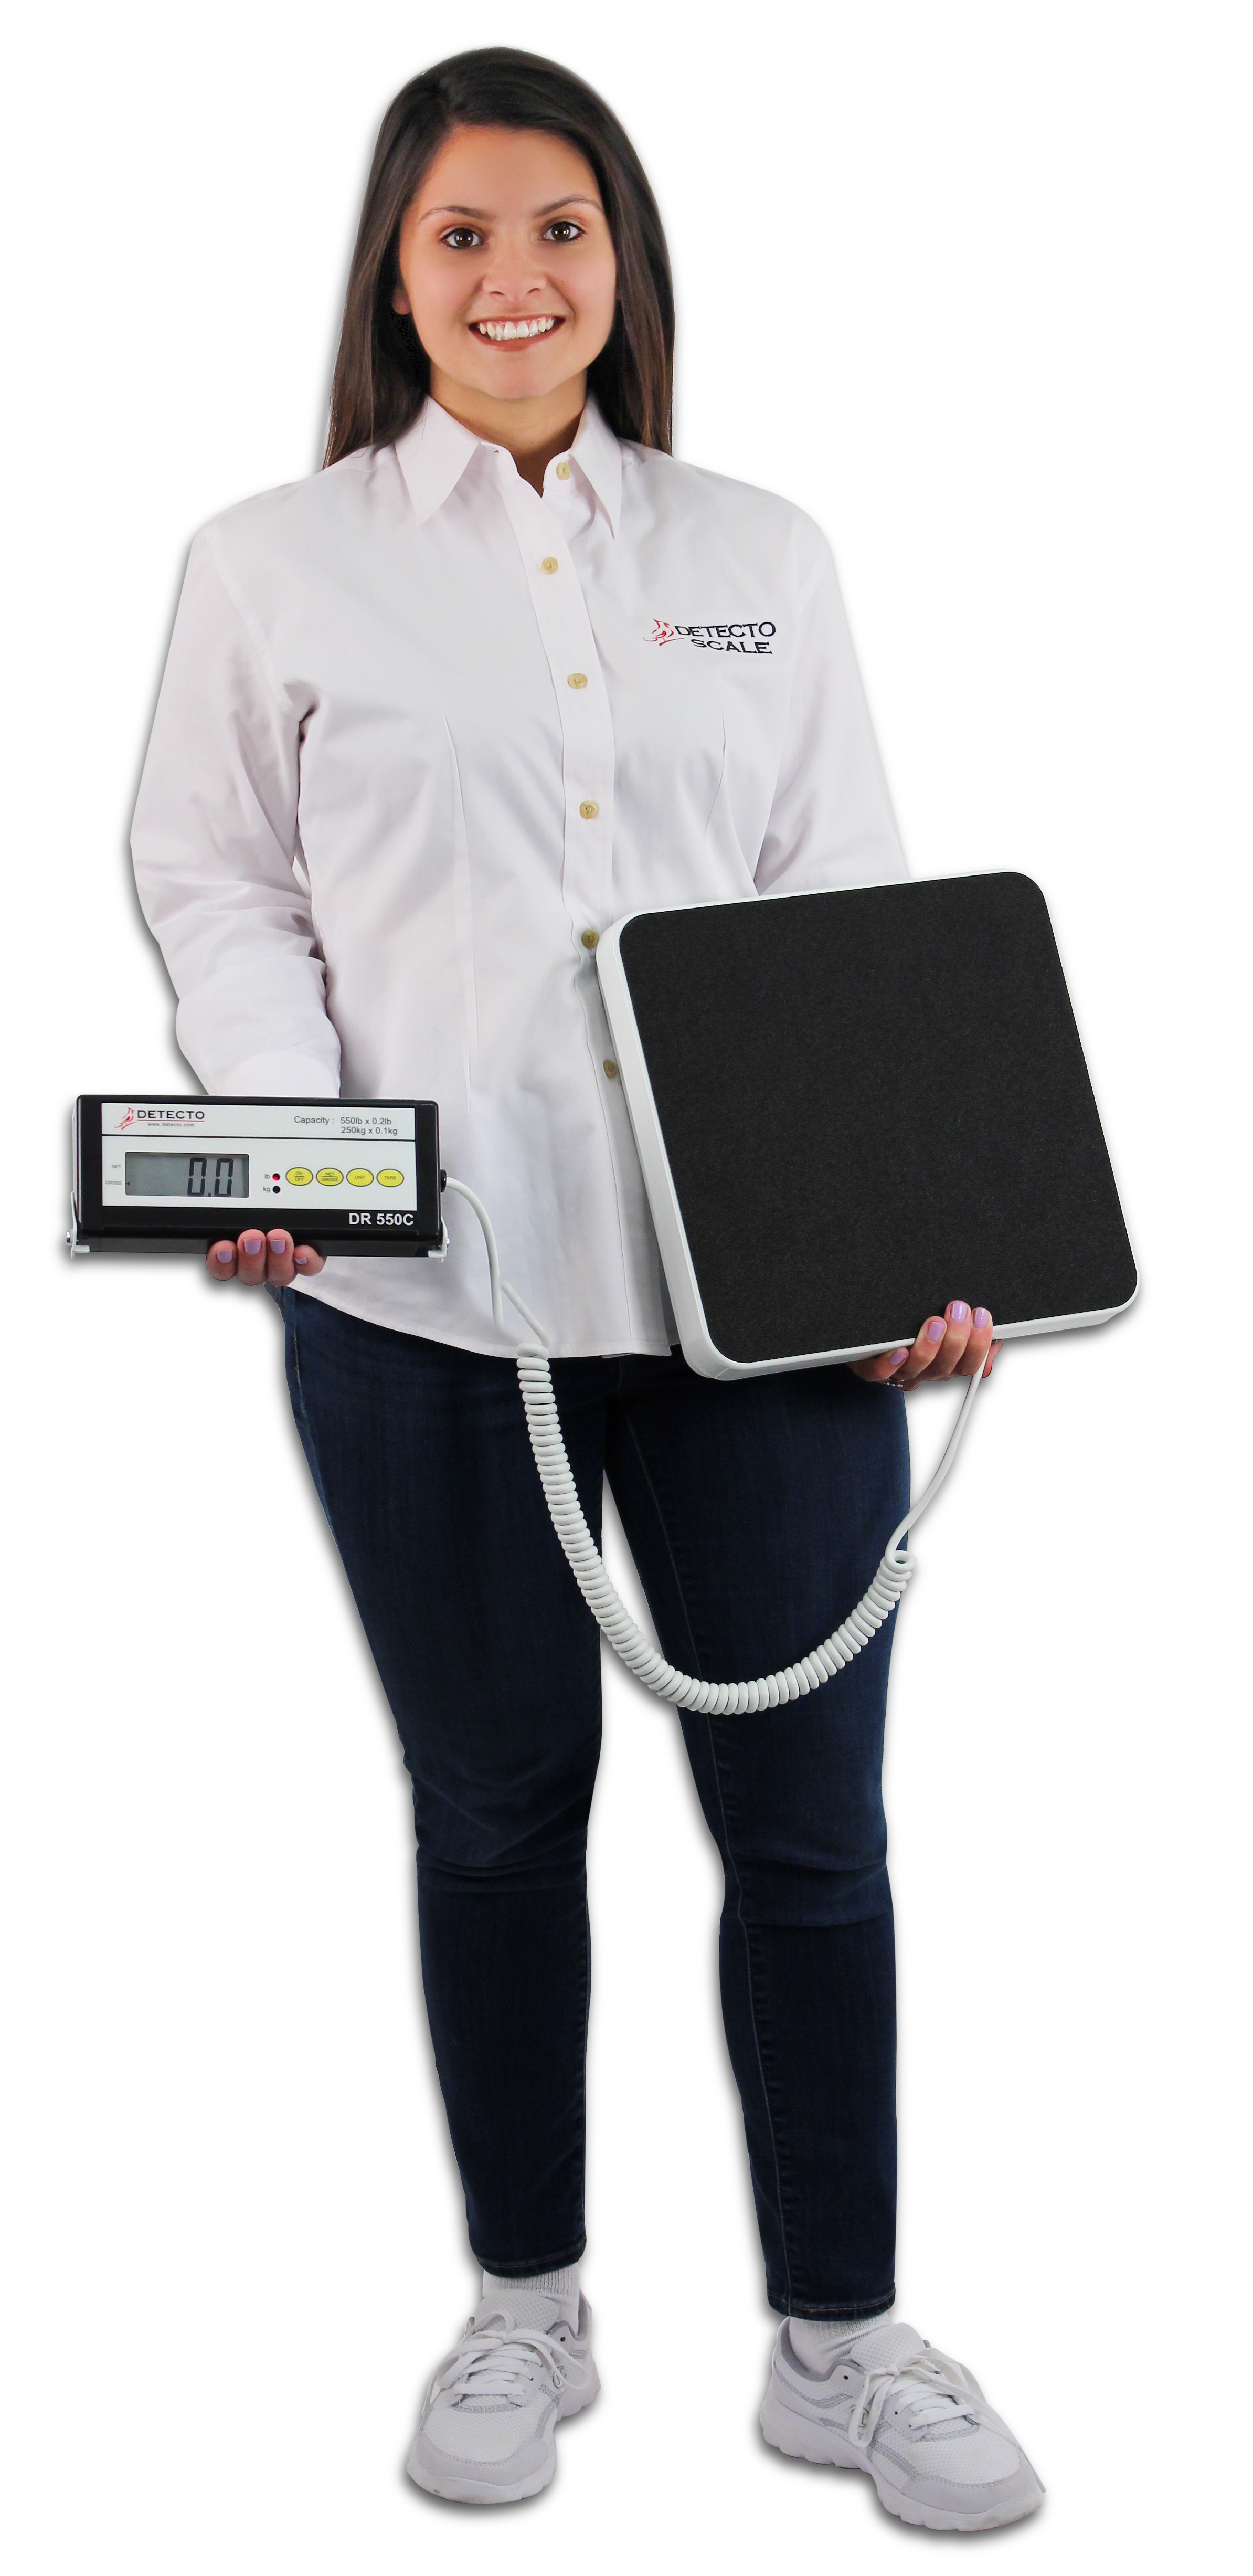 Detecto - DR550C - Stainless Steel Portable Floor Scale